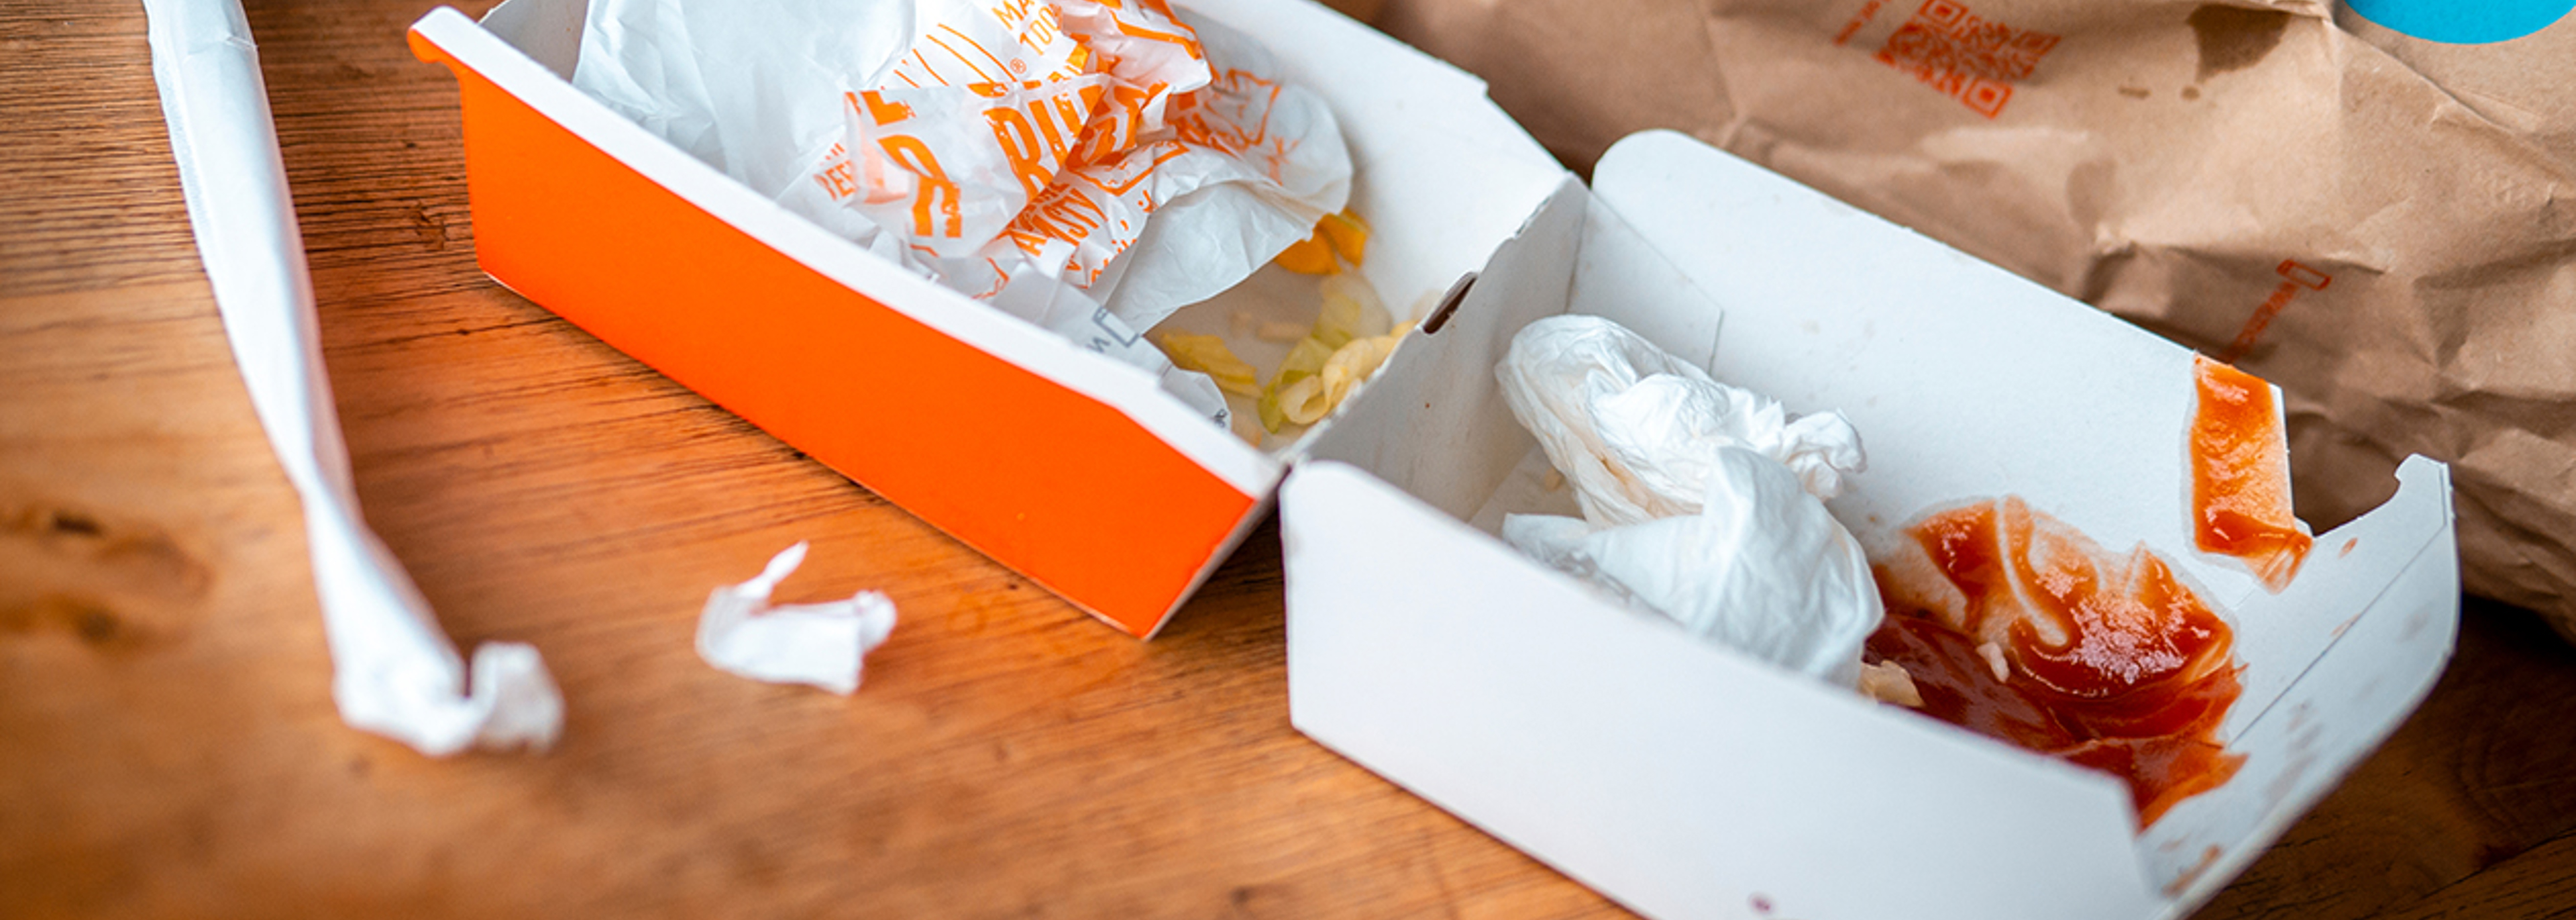 Fast-food wrappers may contain toxic chemicals